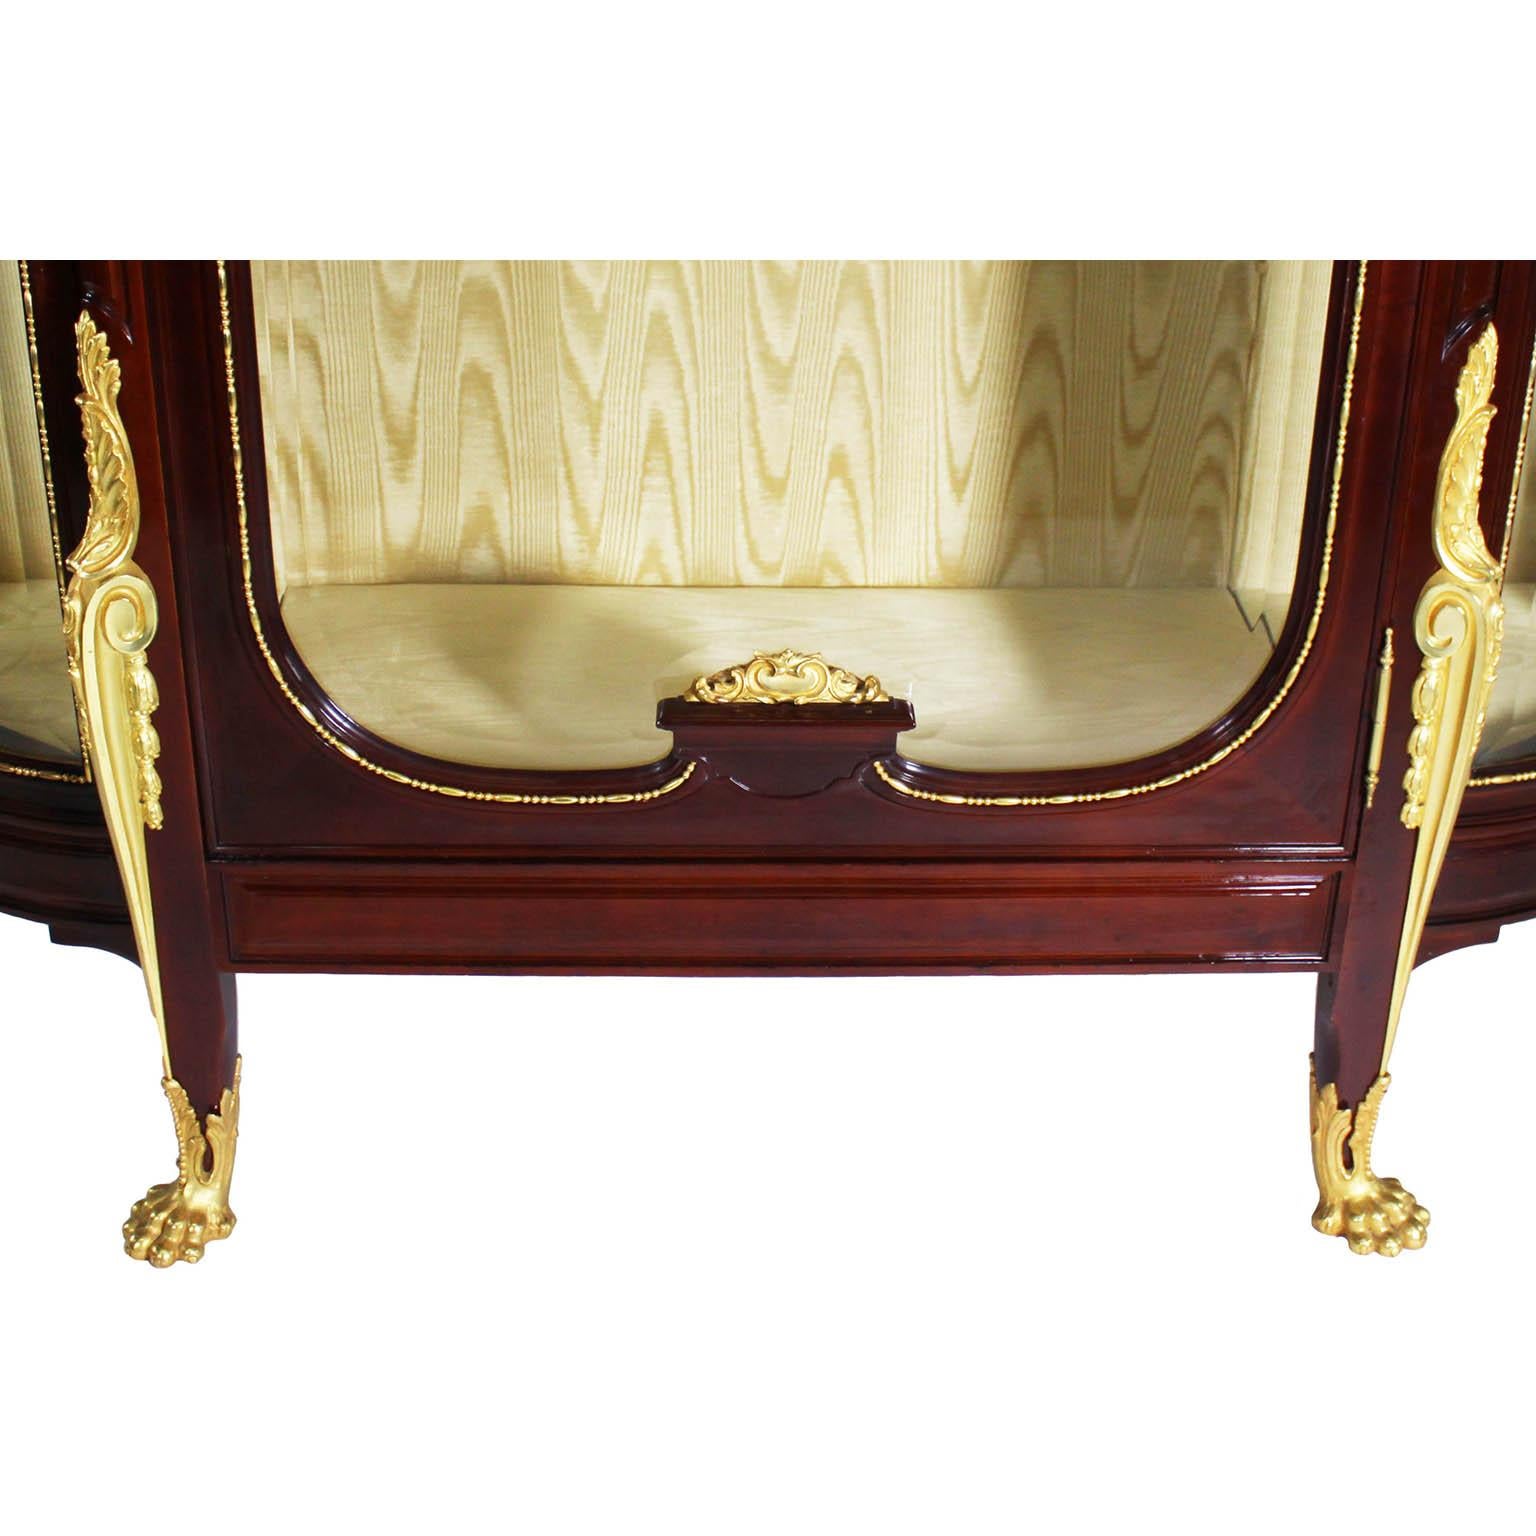 Early 20th Century French 19th/20th Century Louis XV Style Mahogany and Gilt-Bronze Mounted Vitrine For Sale